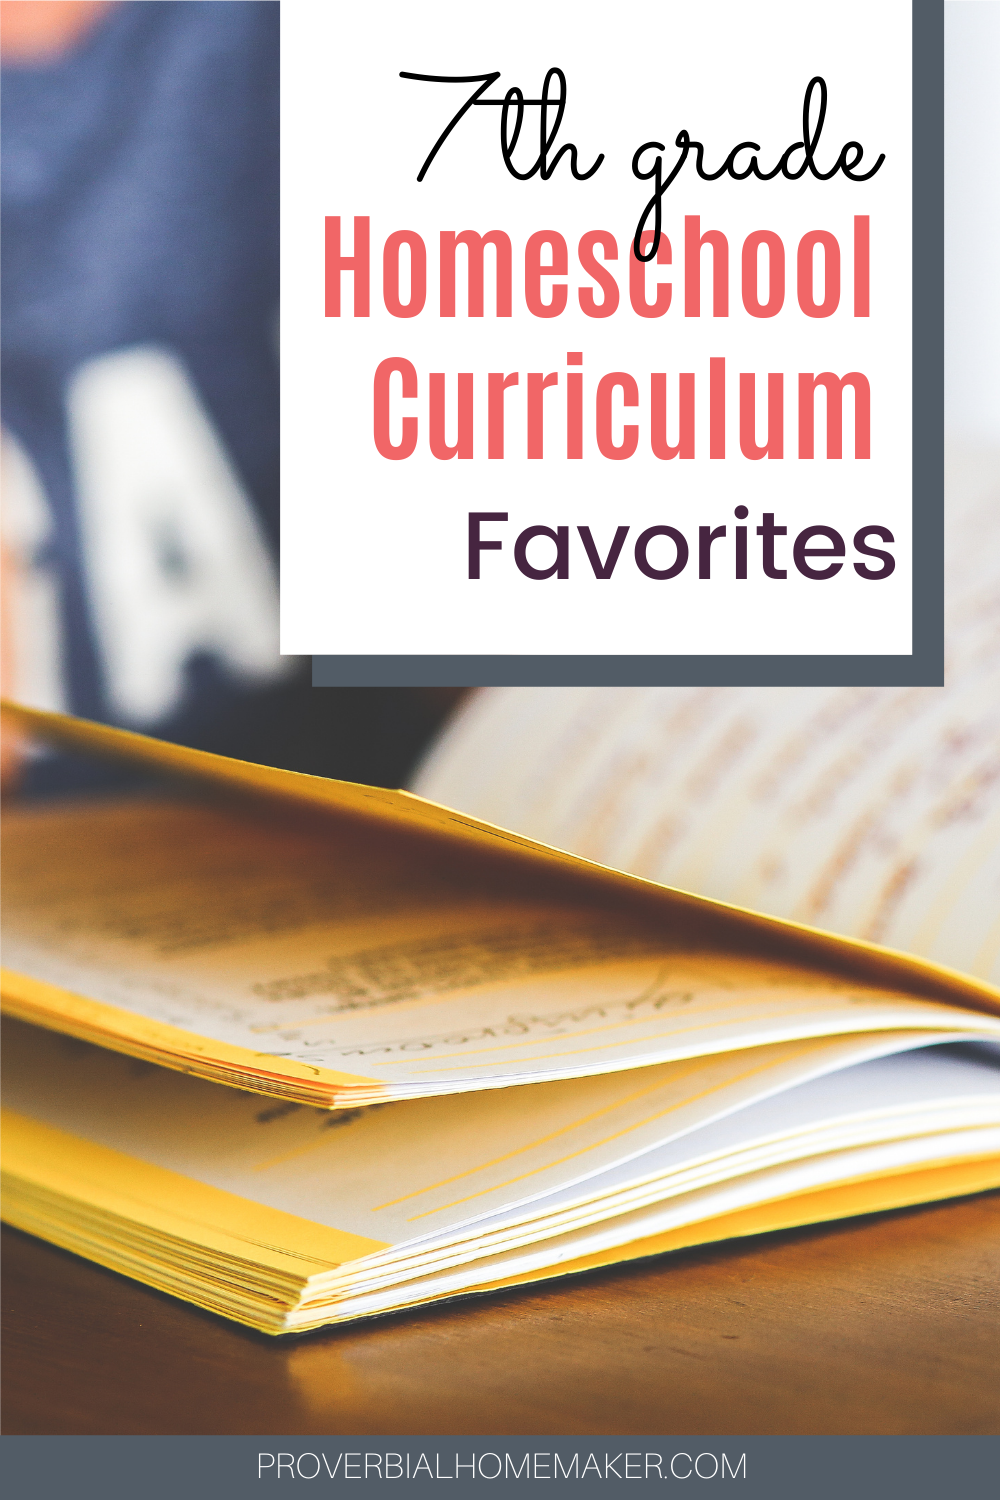 Top 7th grade homeschool curriculum picks from a homeschool mom of 6. Growing independence in Jr. High / middle school years!